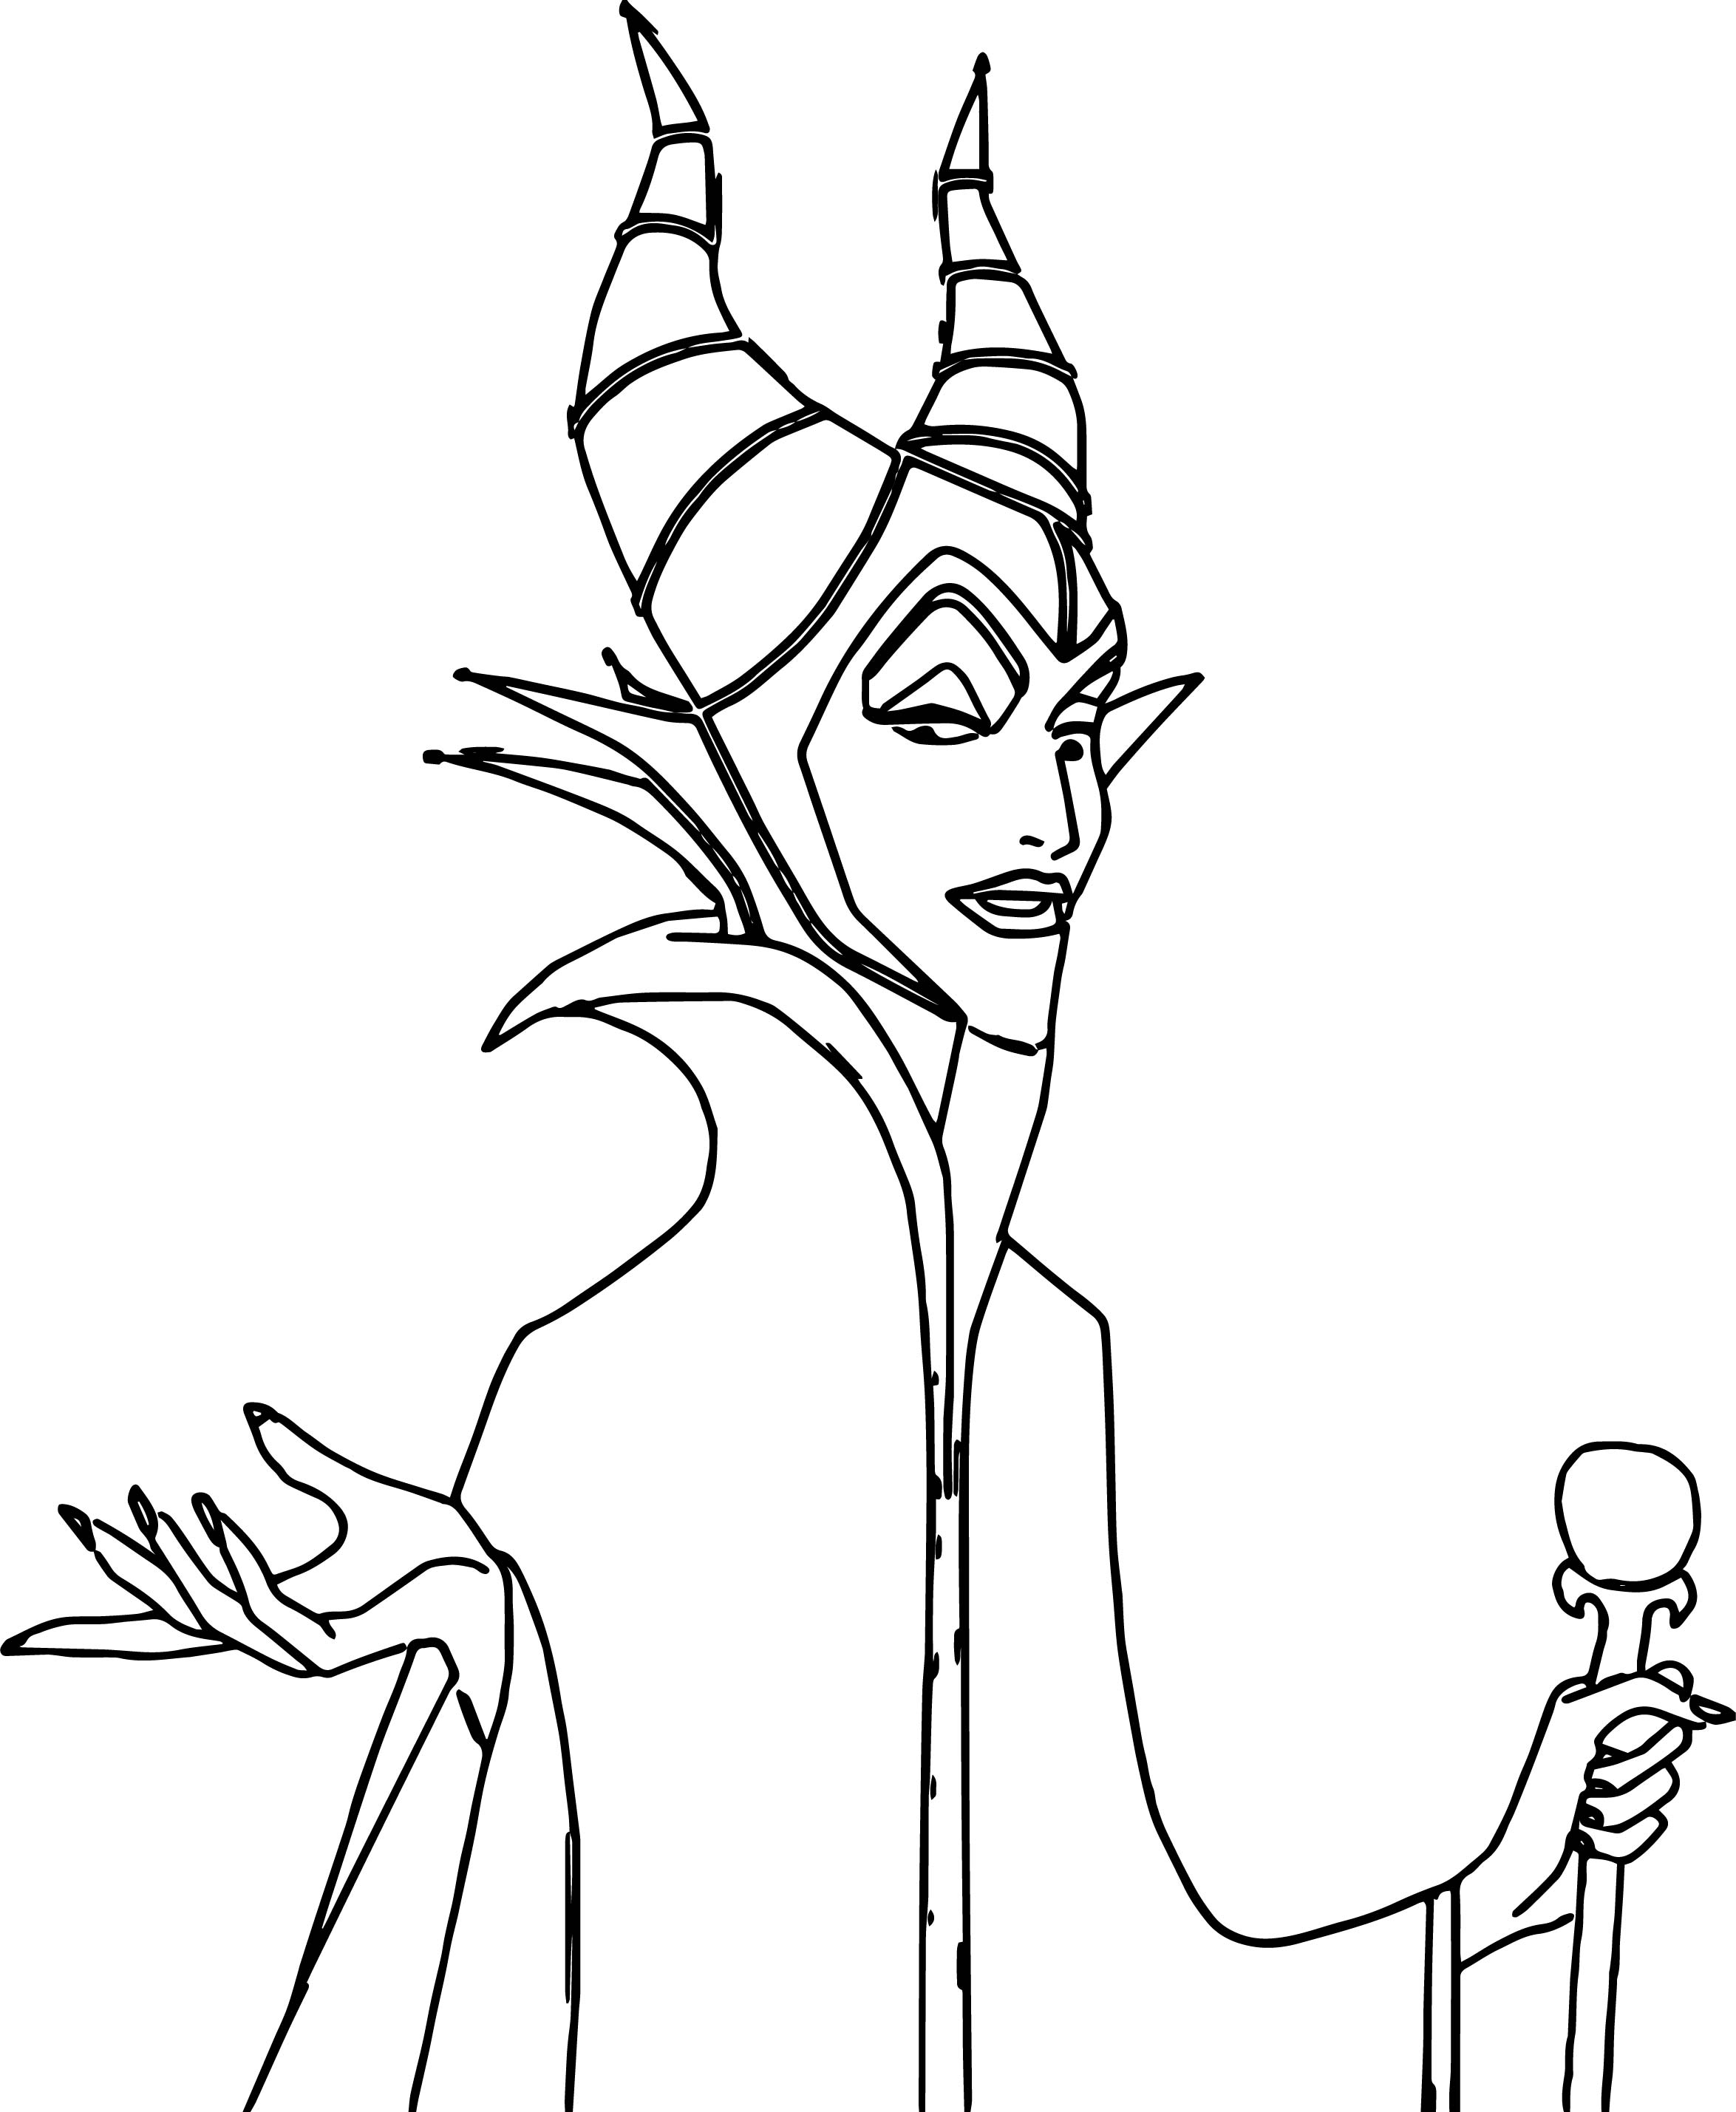 Maleficent Dragon Coloring Pages at GetDrawings | Free download